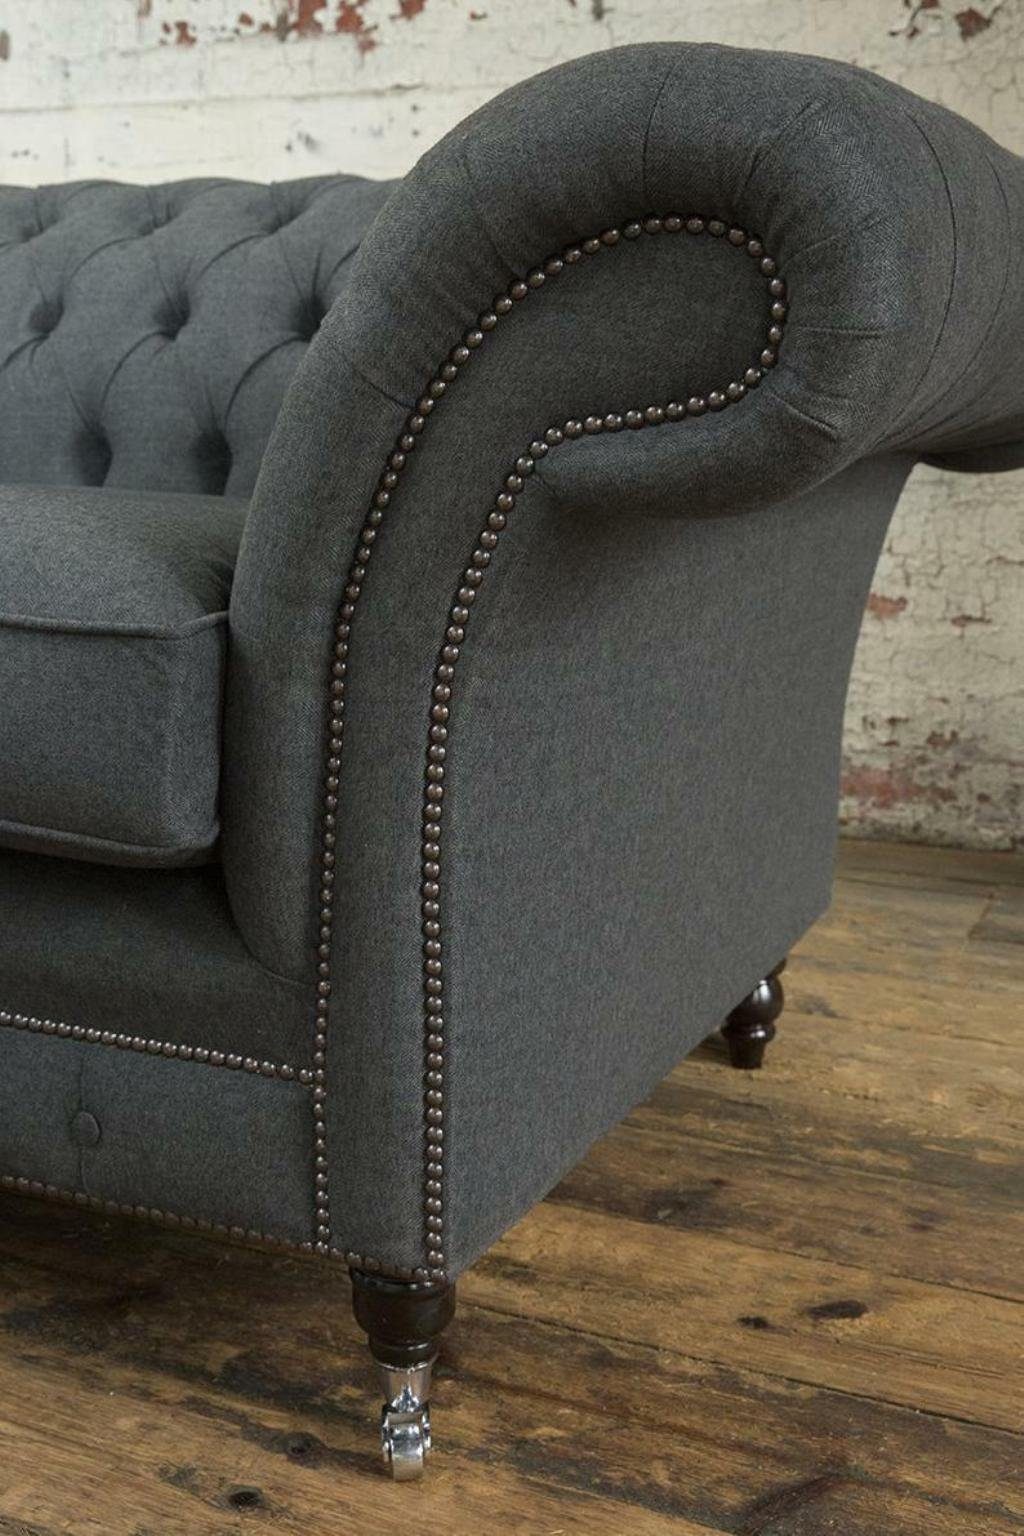 JVmoebel Chesterfield-Sofa, Luxus Sofa Stoff Couch 2 Couchen Polster Textil Chesterfield Sitzer